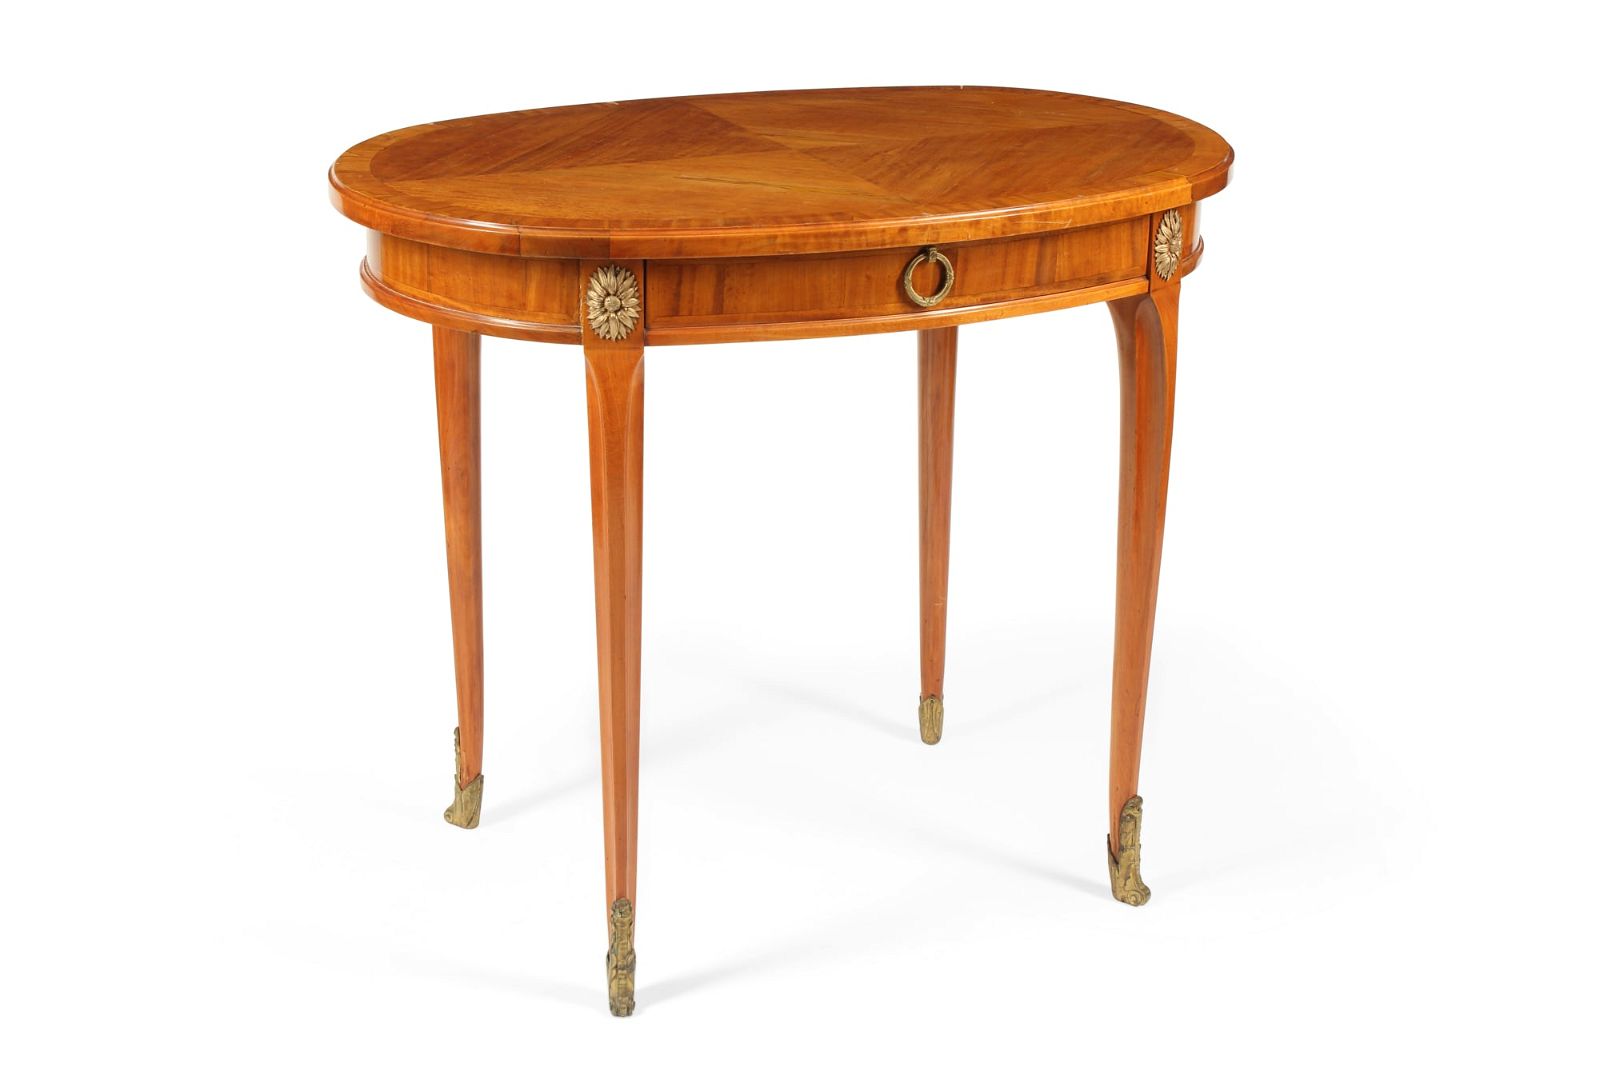 A FRENCH SATINWOOD OVAL CENTER